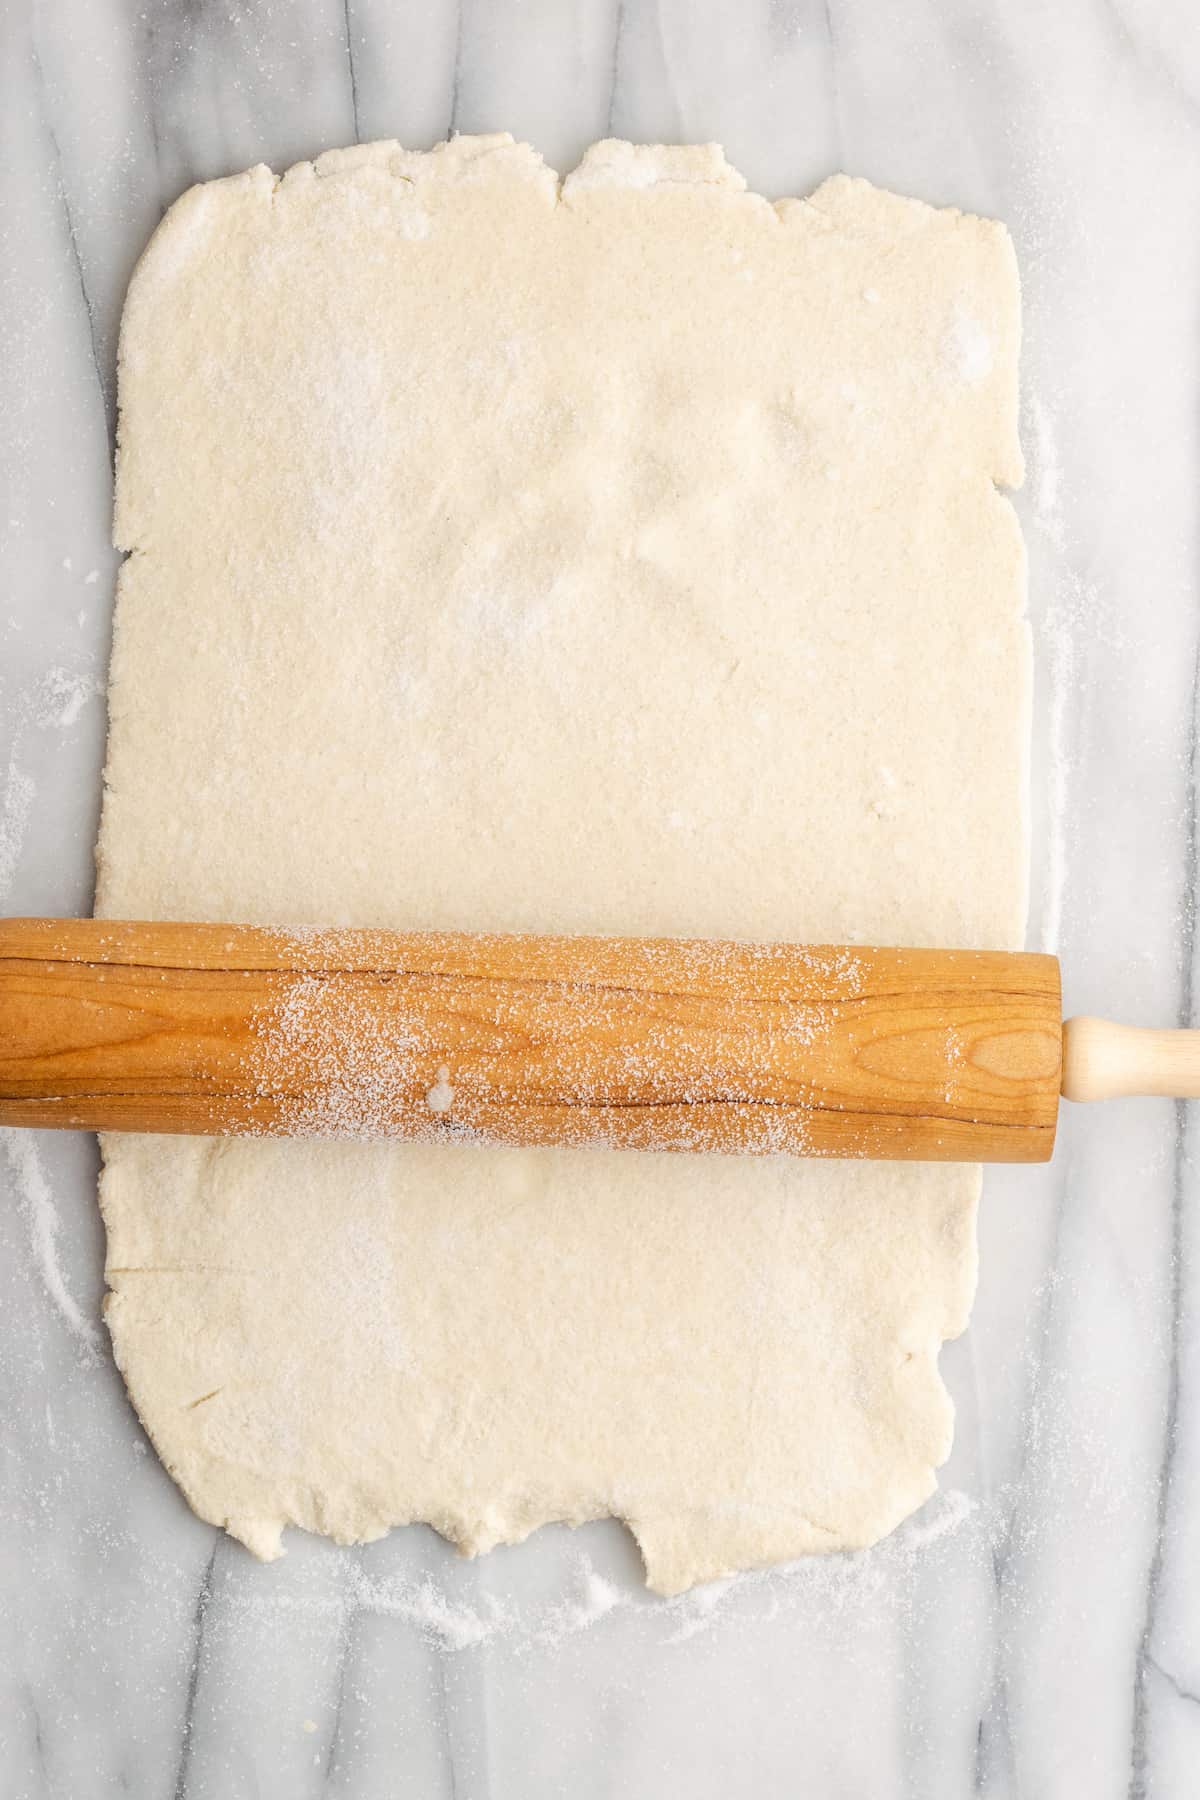 A rectangle of puff pastry with a rolling pin on it